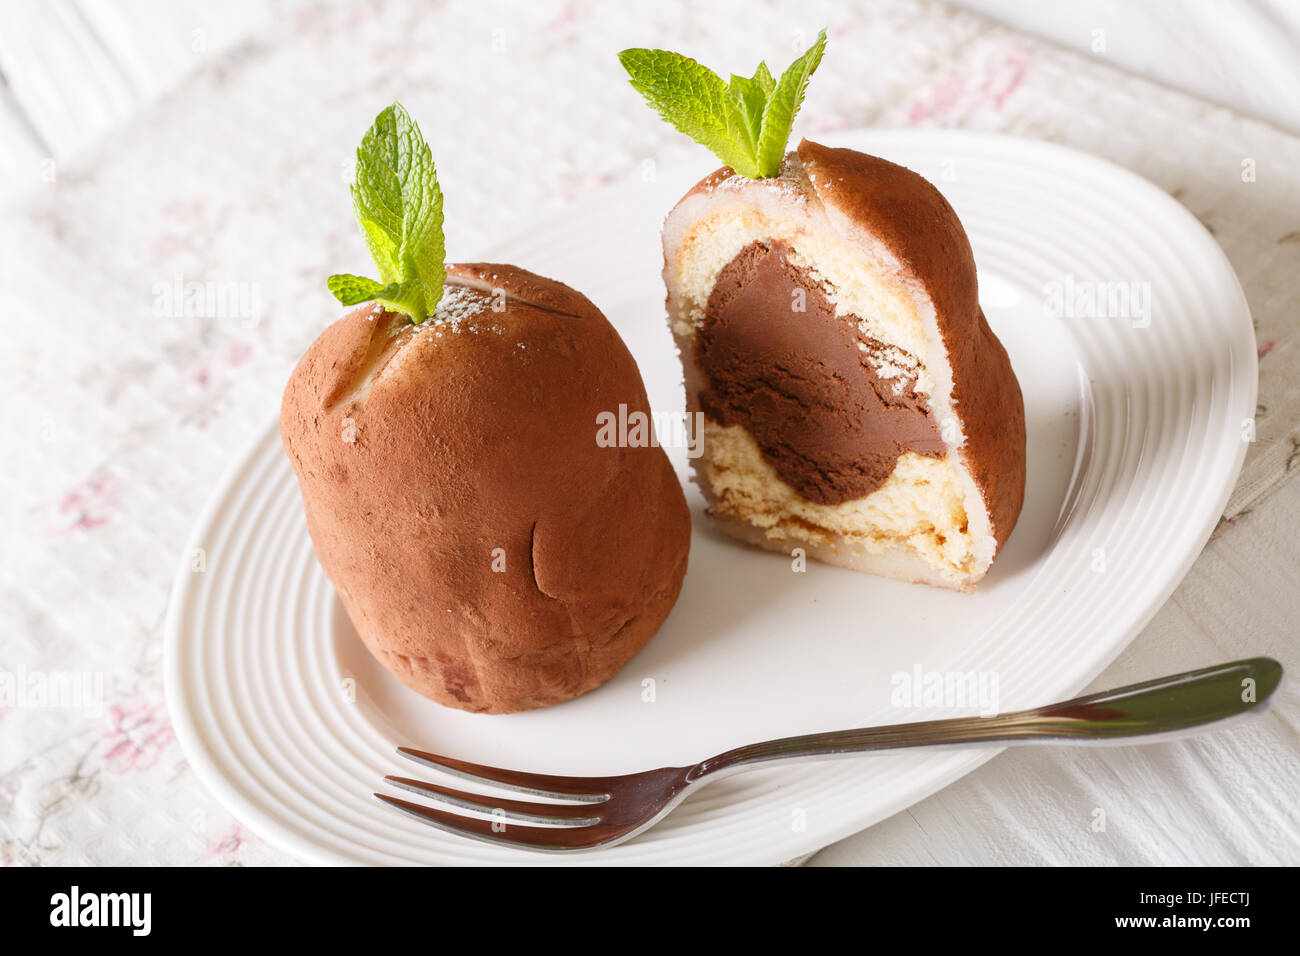 Sliced chocolate rum balls cake with mint and cocoa powder close-up on a plate on a table. horizontal Stock Photo